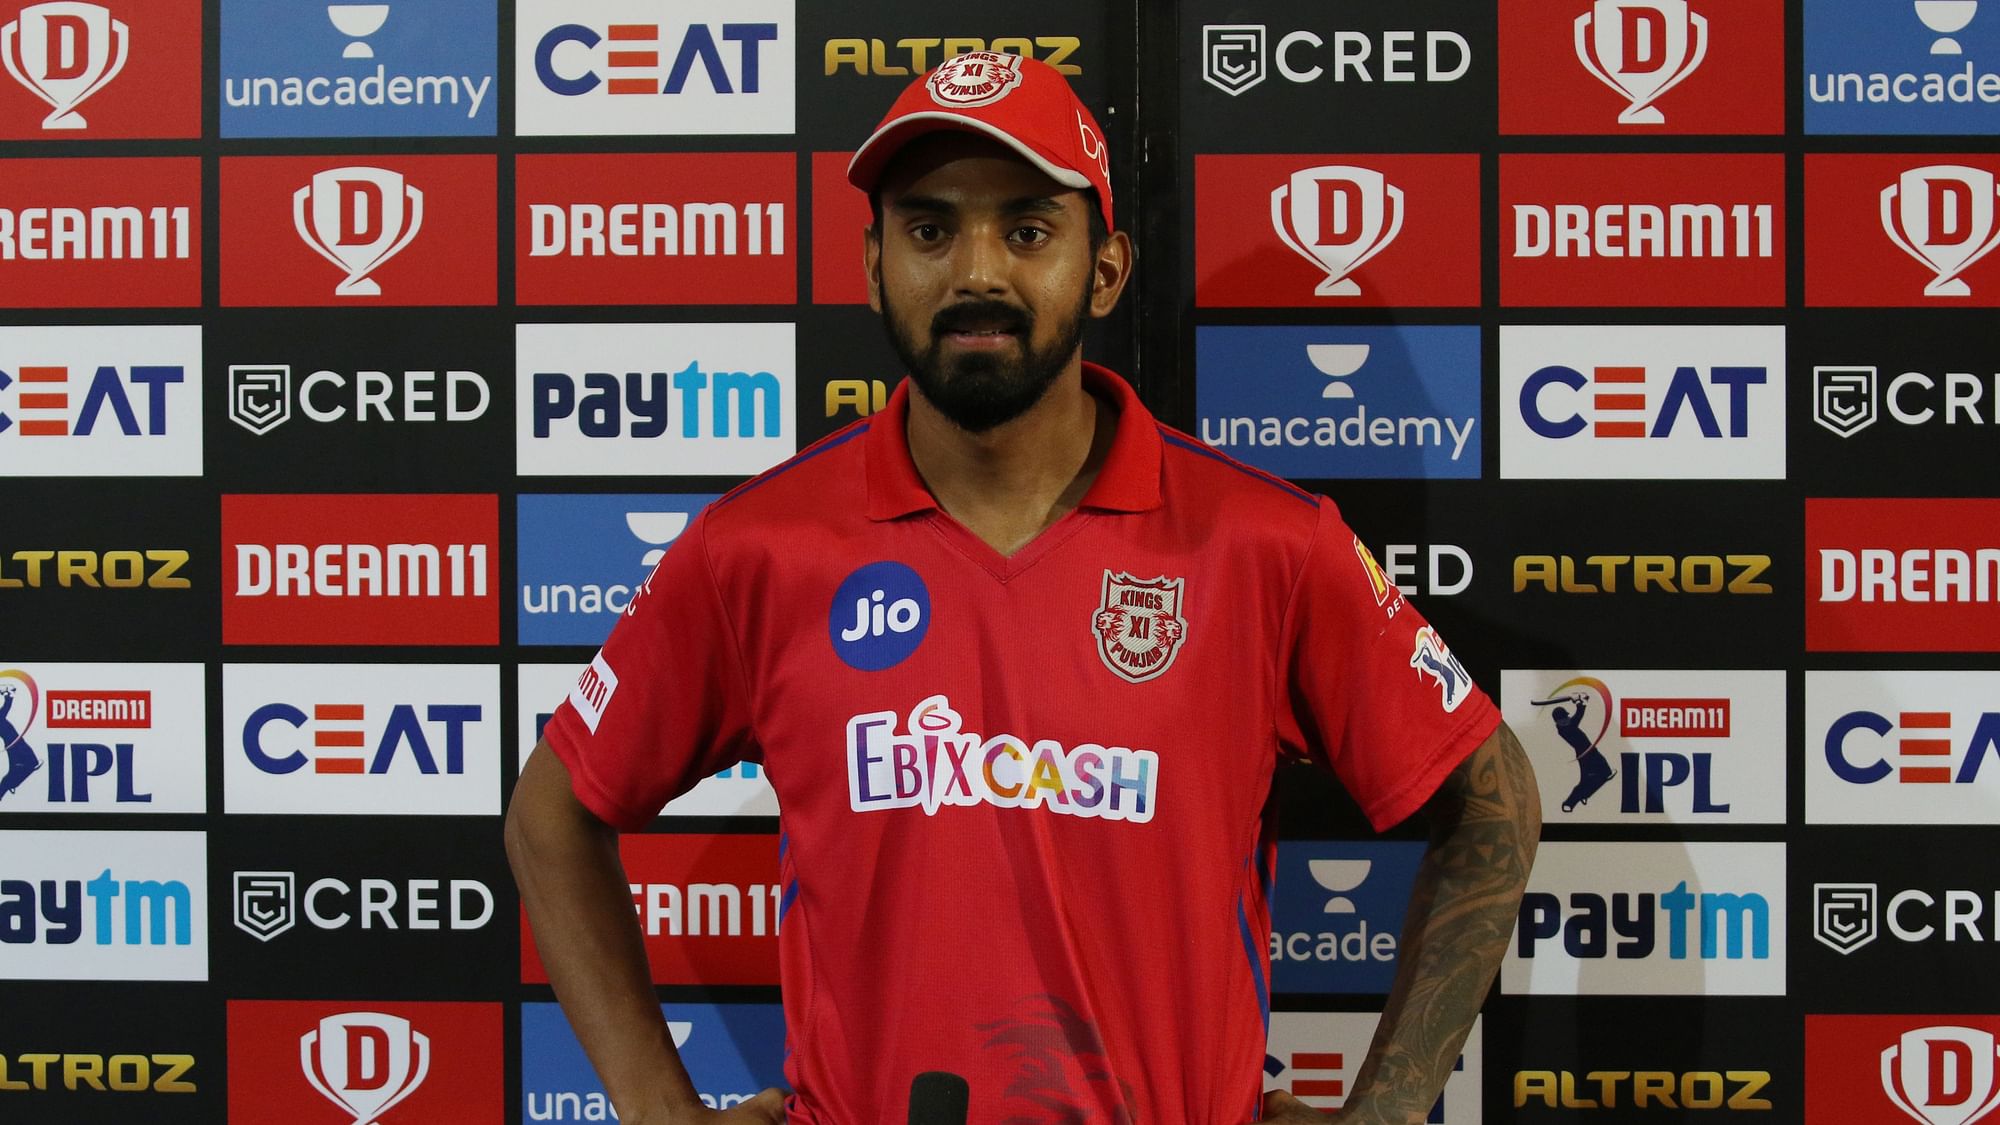 KL Rahul said the team management will discuss if they can play an extra bowler after their 48-run defeat against Mumbai Indians.